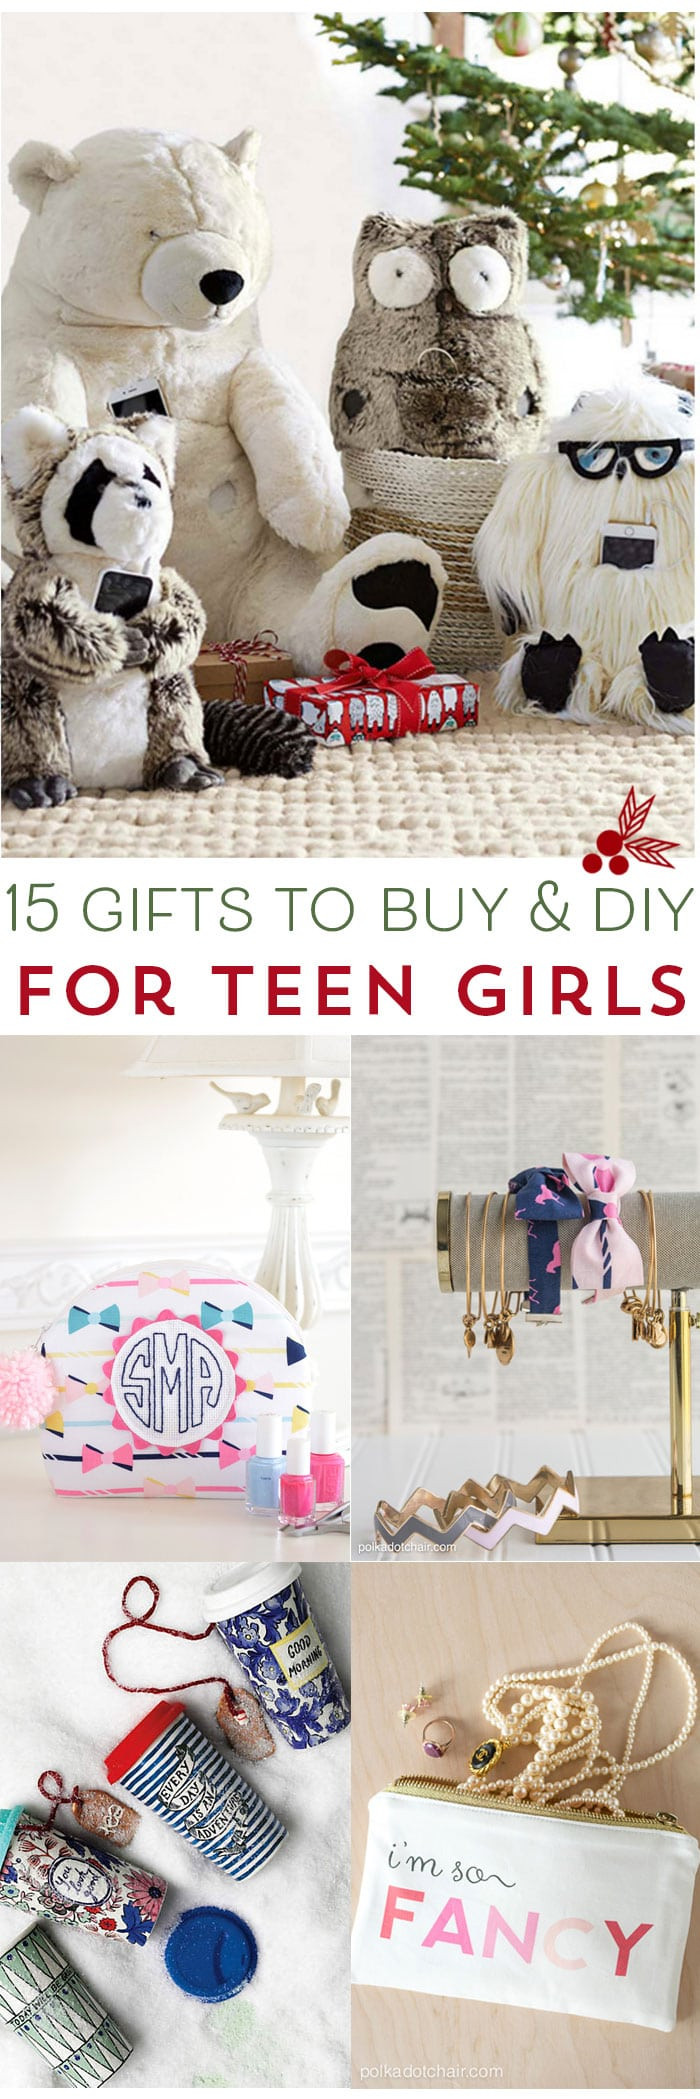 DIY Christmas Gifts For Teenagers
 15 Gifts for Teen Girls to DIY and Buy The Polka Dot Chair